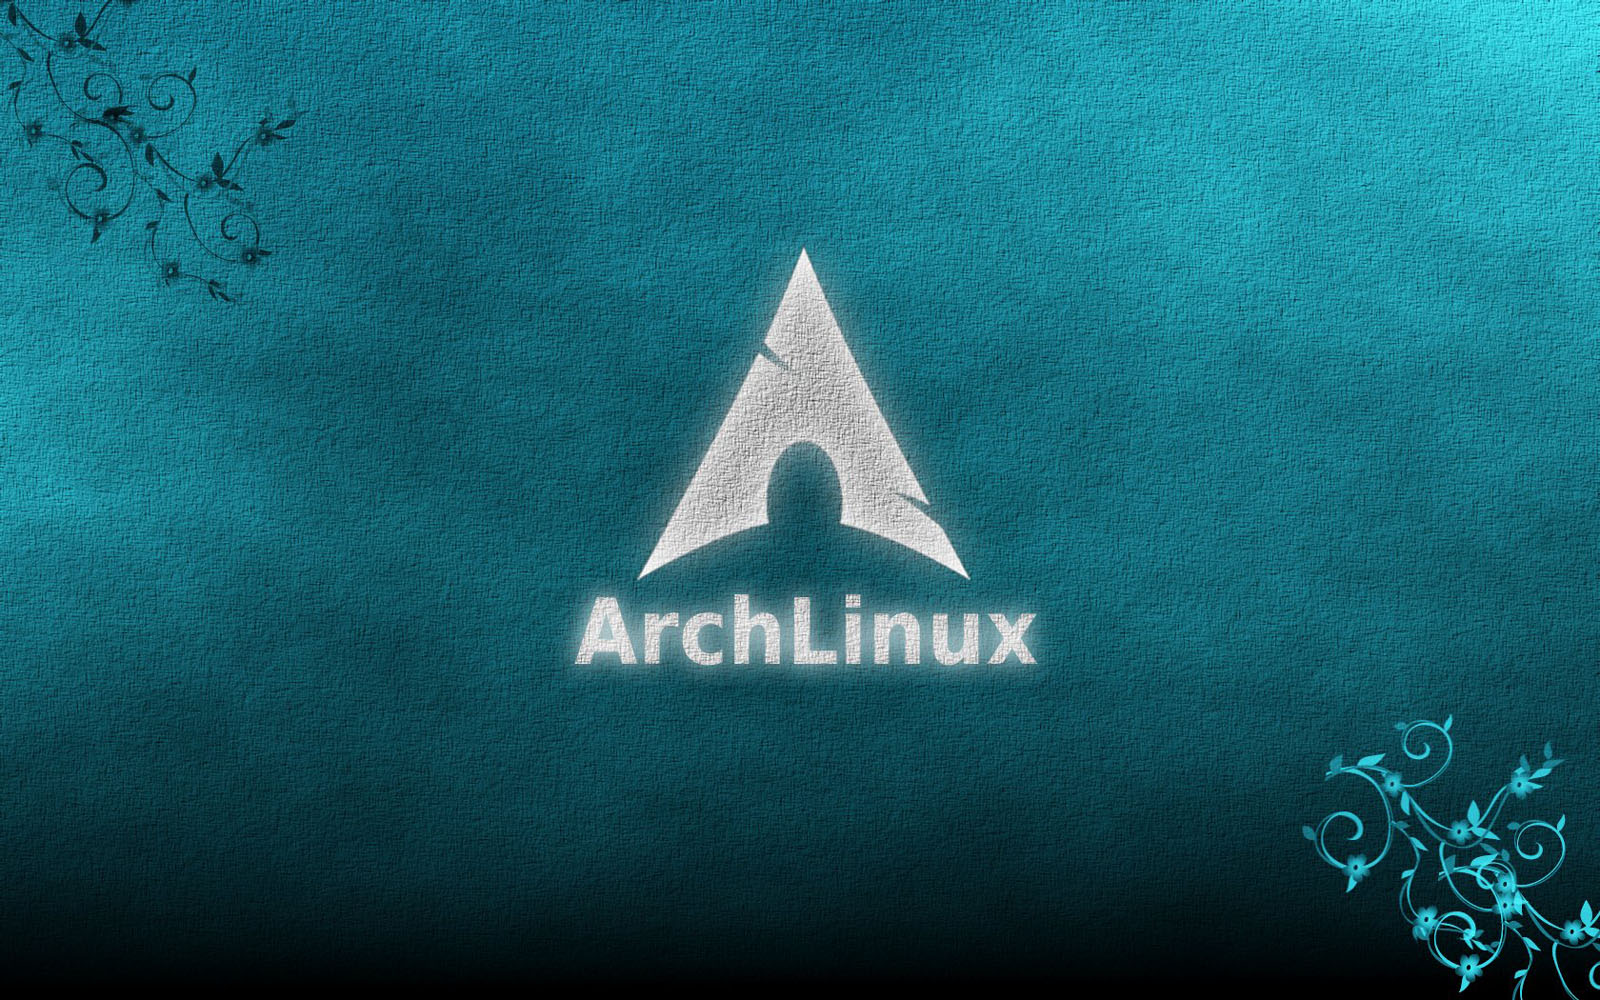 Tag Arch Linux Wallpapers Backgrounds Photos Images andPictures